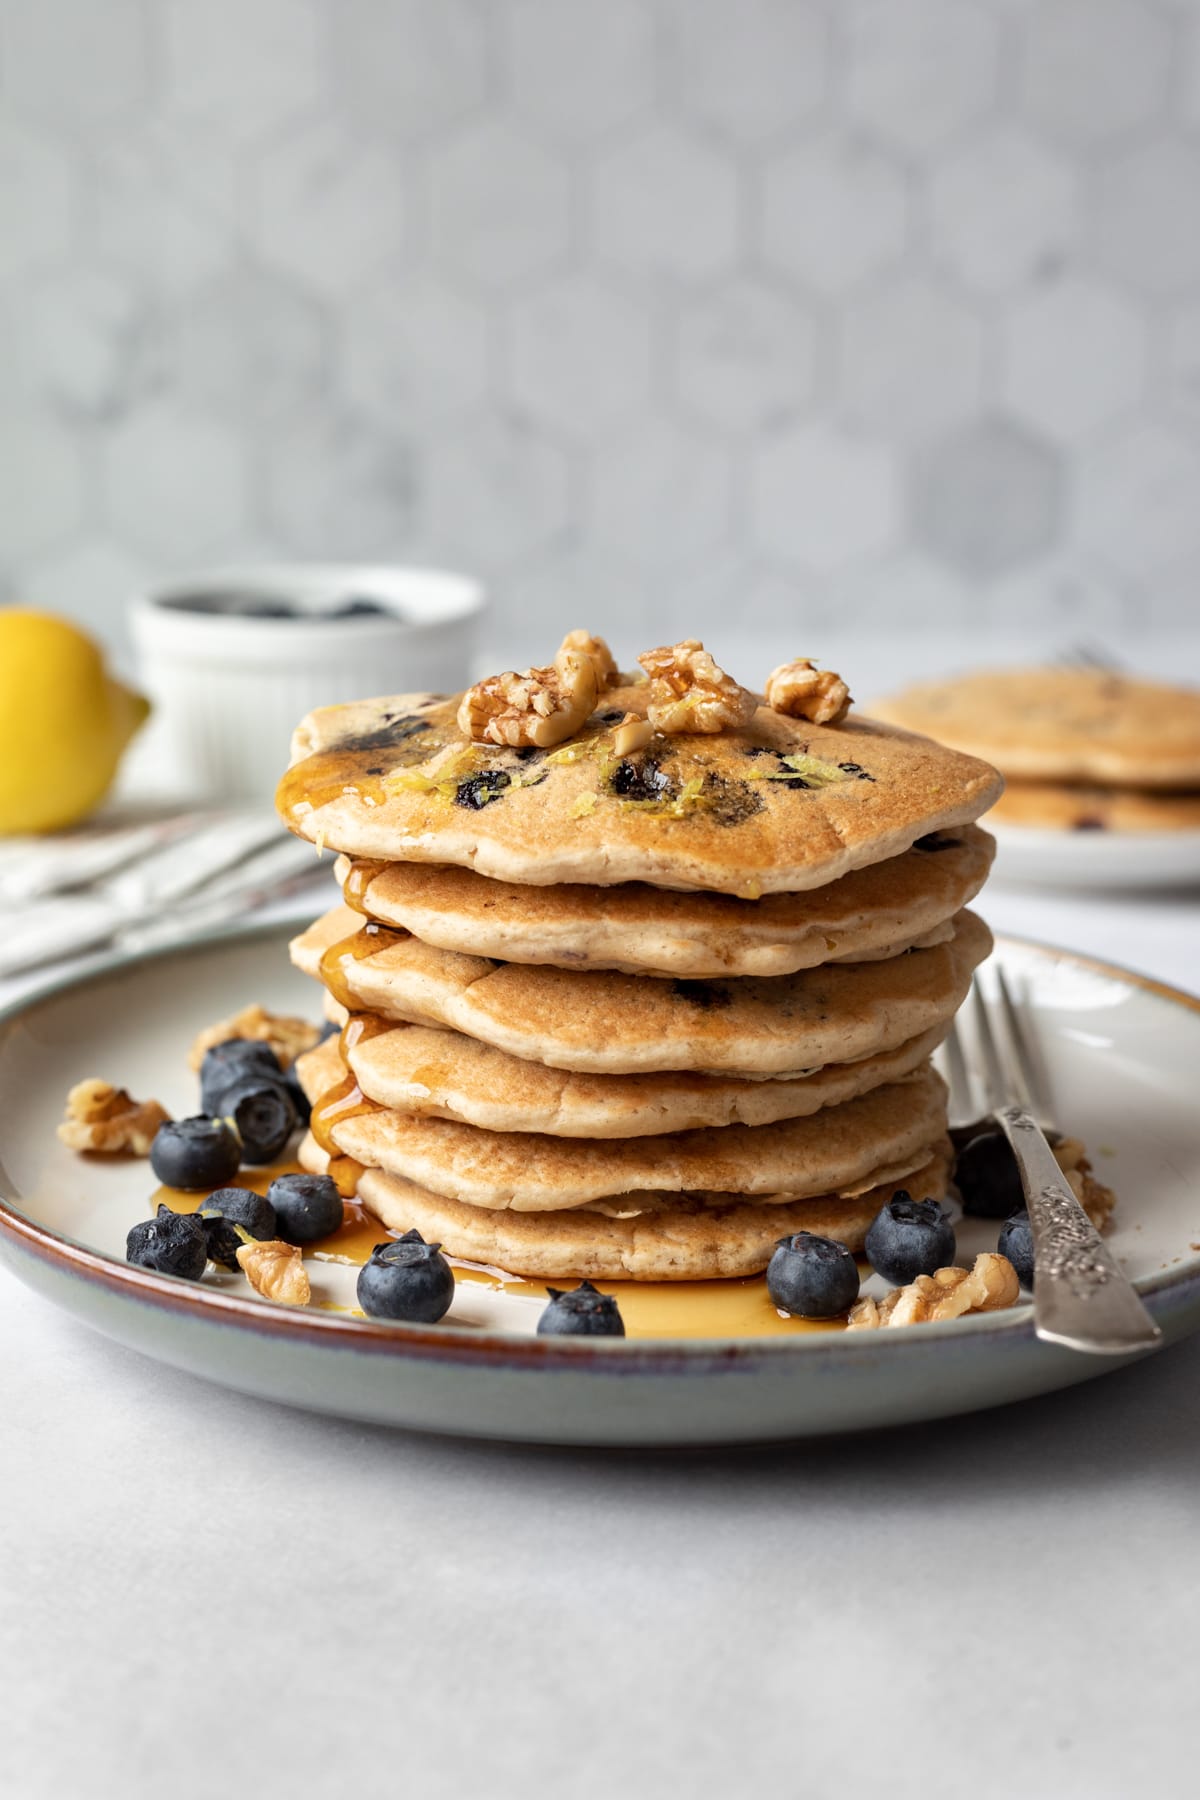 a stack of 6 pancakes topped with walnuts, blueberries, and syrup.